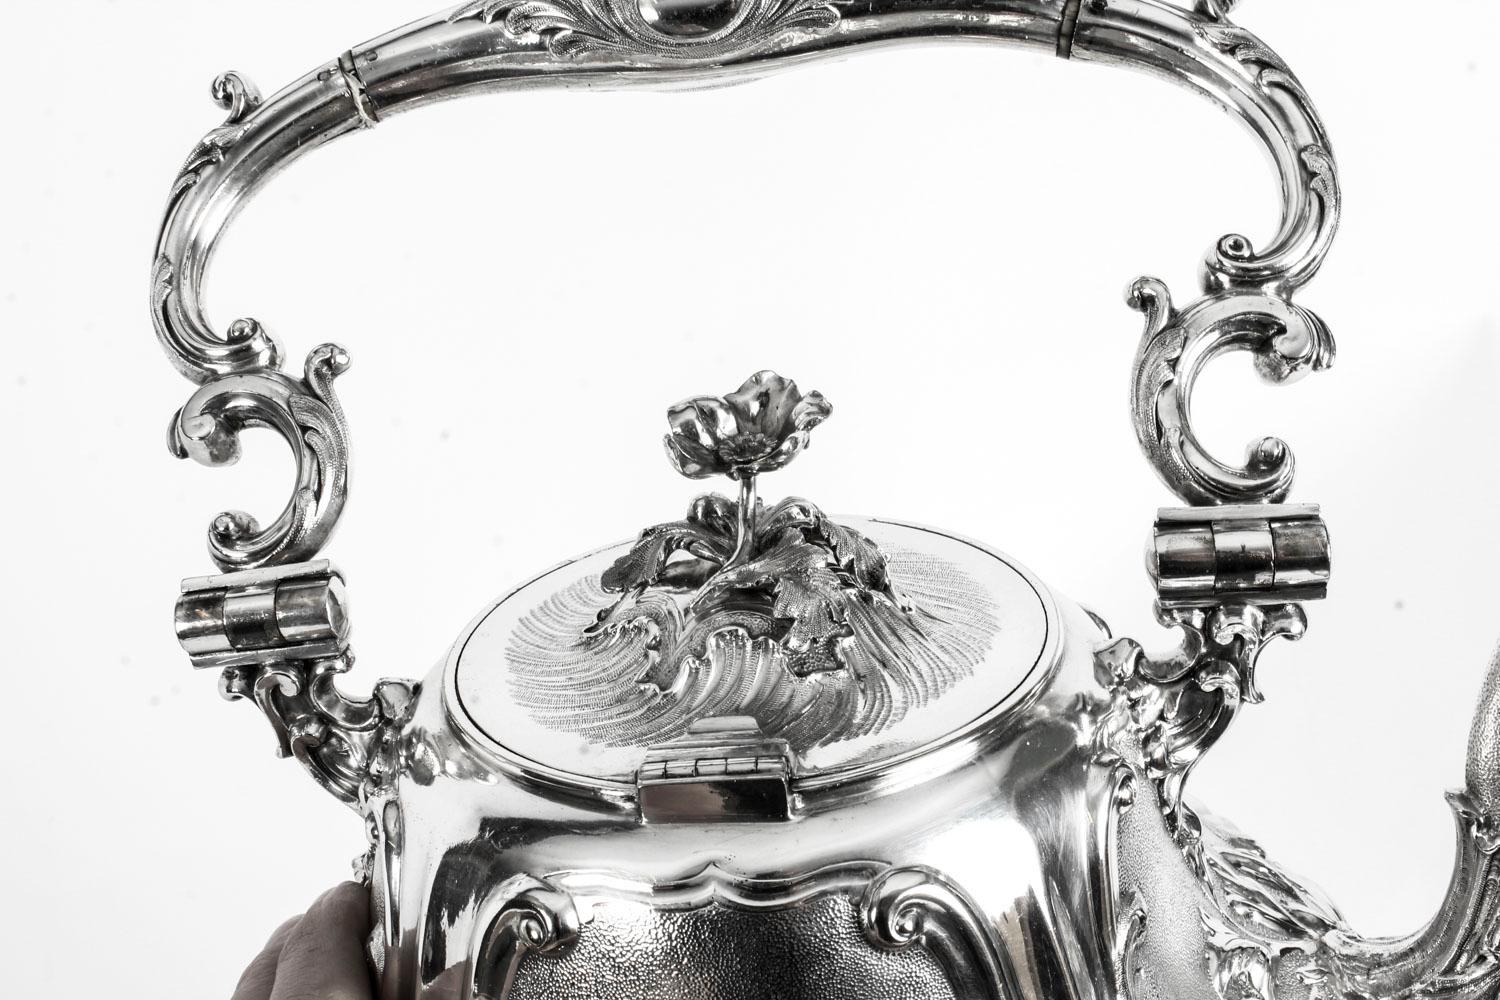 Antique Silver Plate Spirit Kettle on Stand by Elkington, 19th Century 6